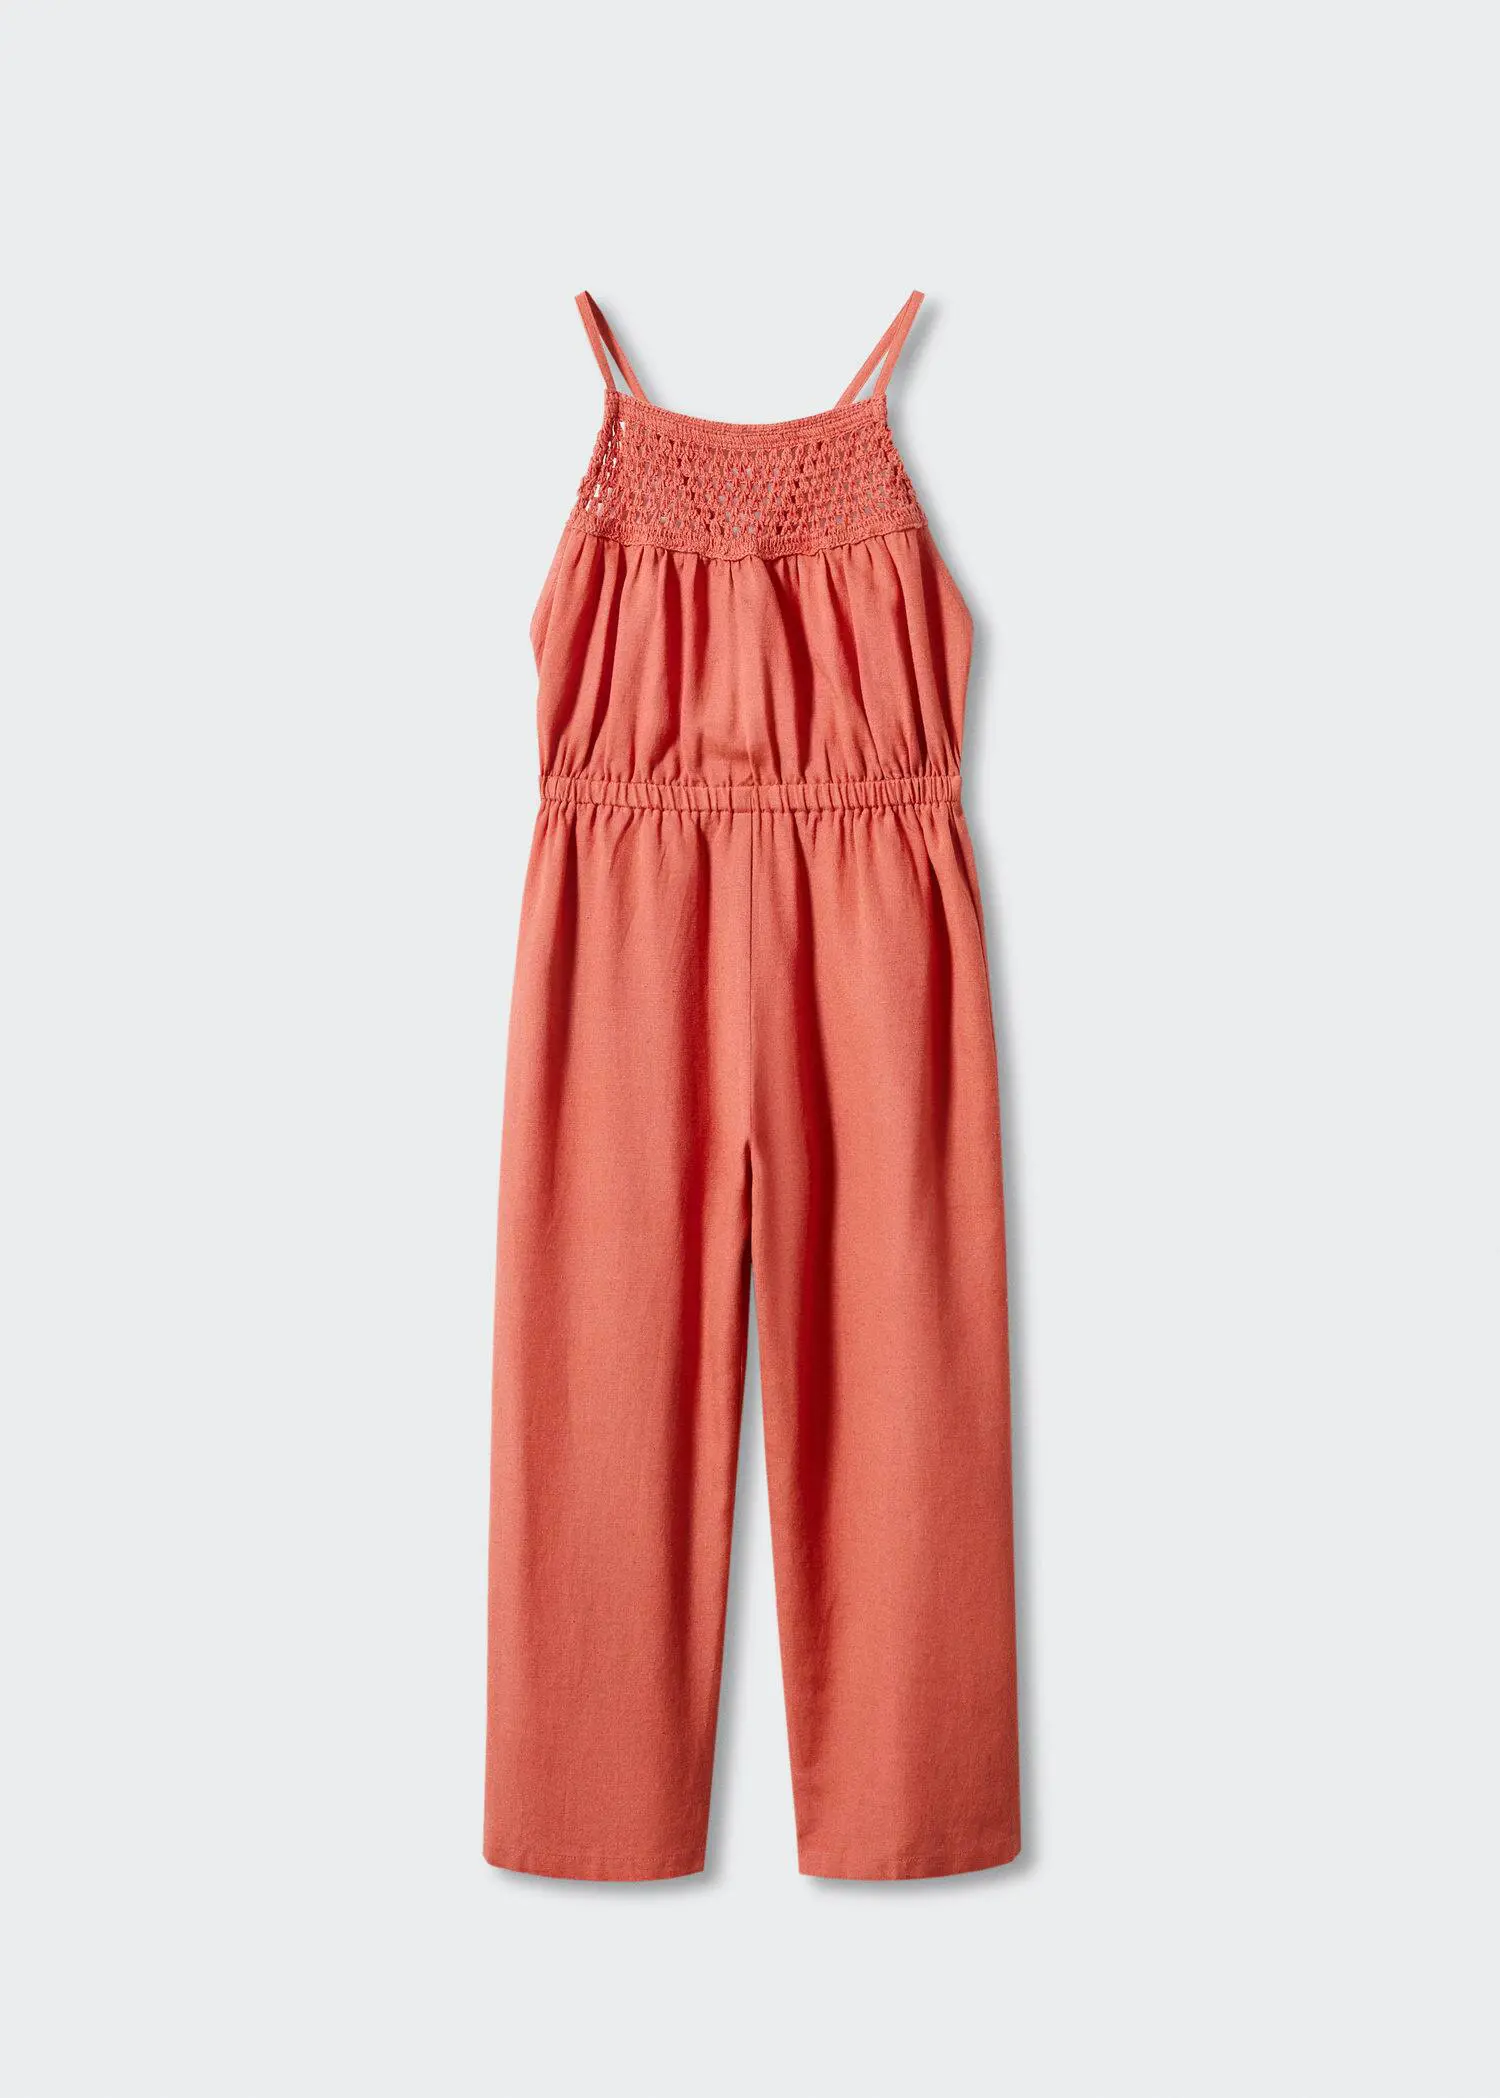 Mango Ruched long jumpsuit. a coral colored jumpsuit with spaghetti straps and an elastic waist. 